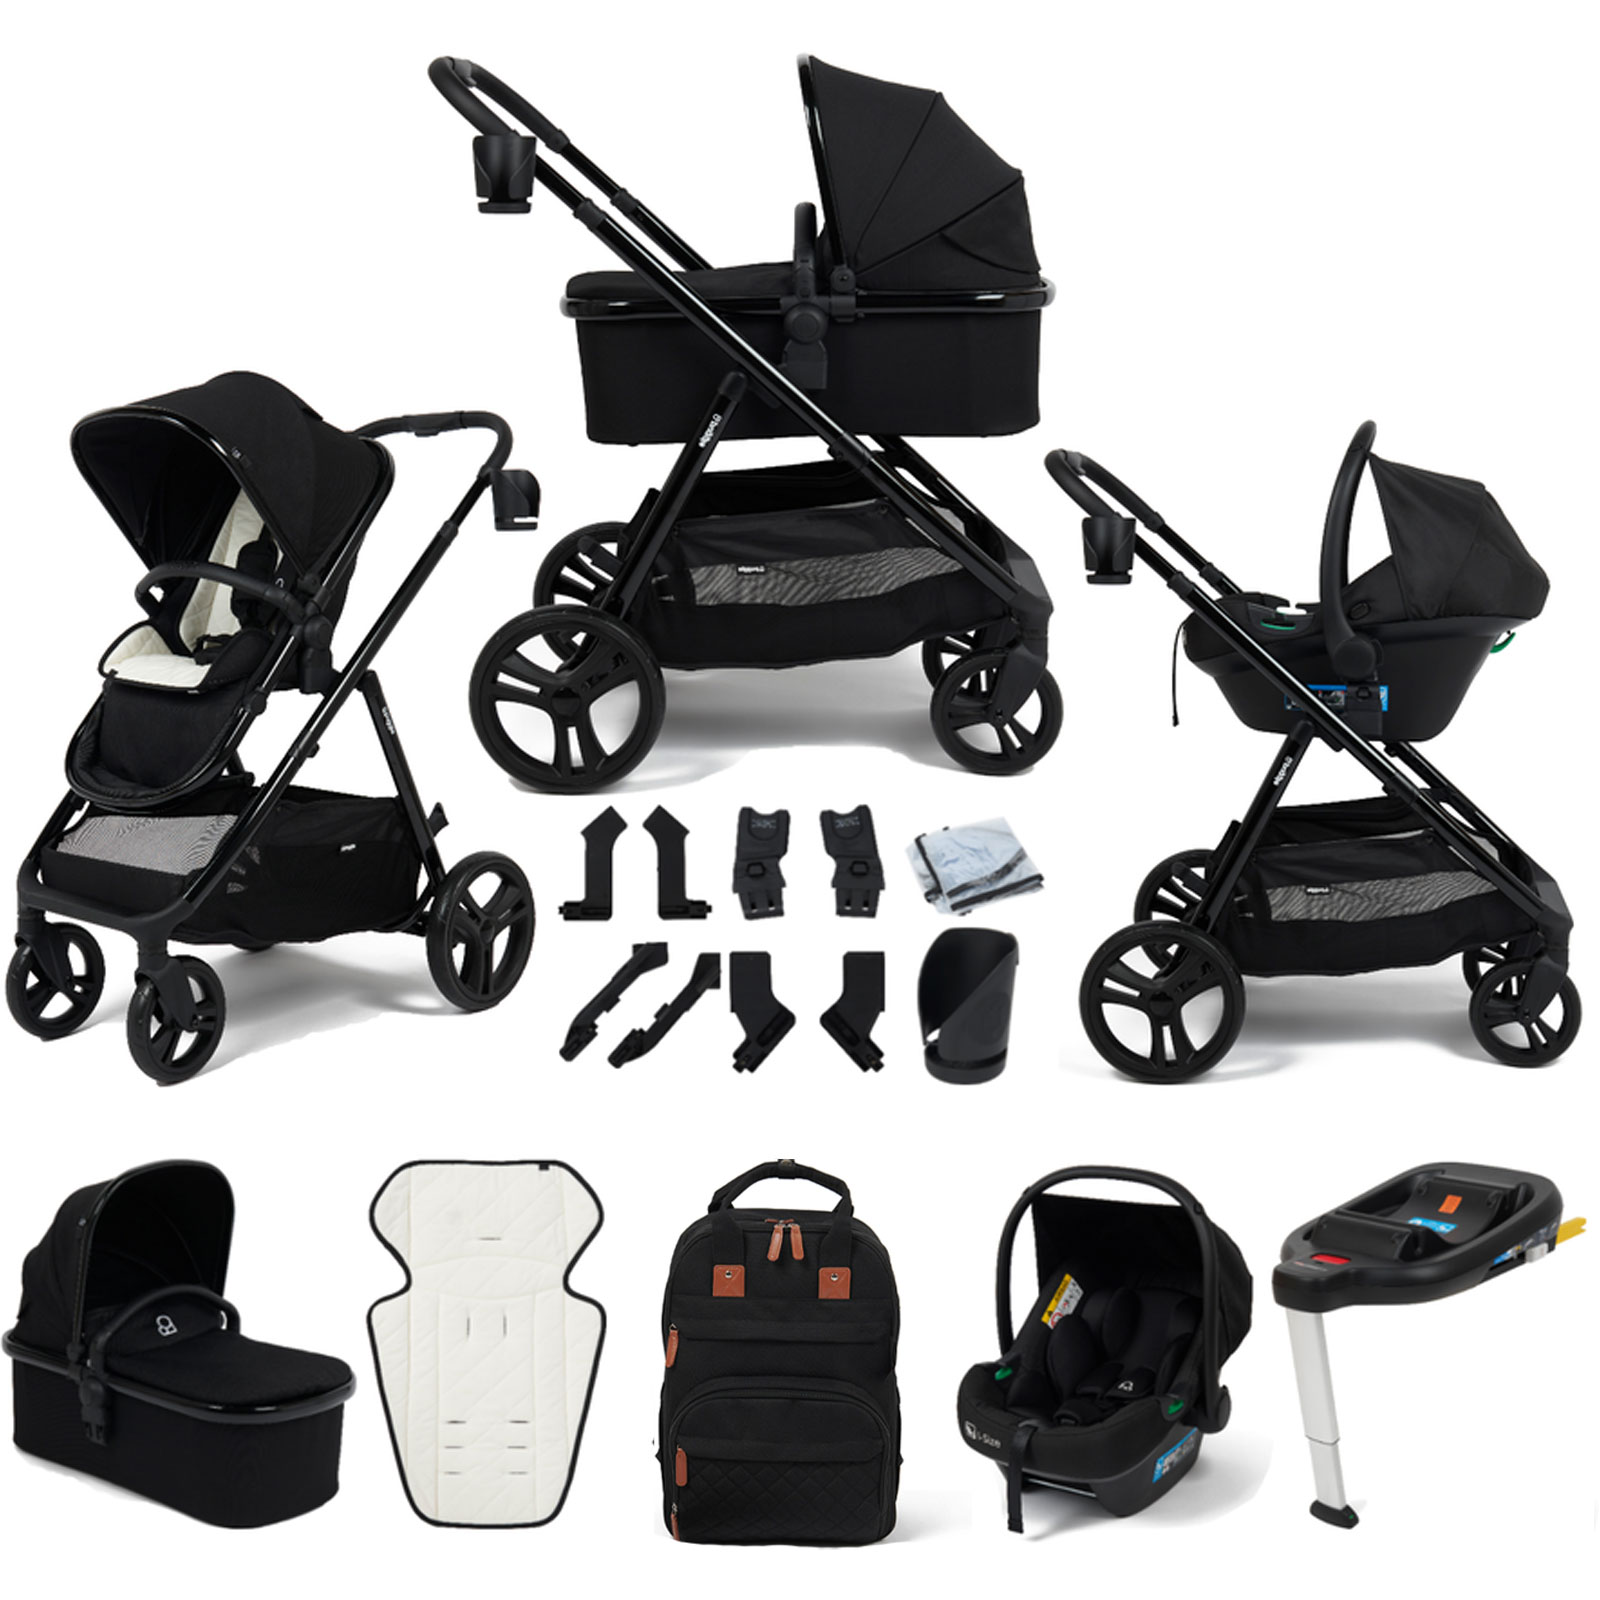 Puggle Memphis 3-in-1 i-Size Travel System With ISOFIX Base - Midnight Black